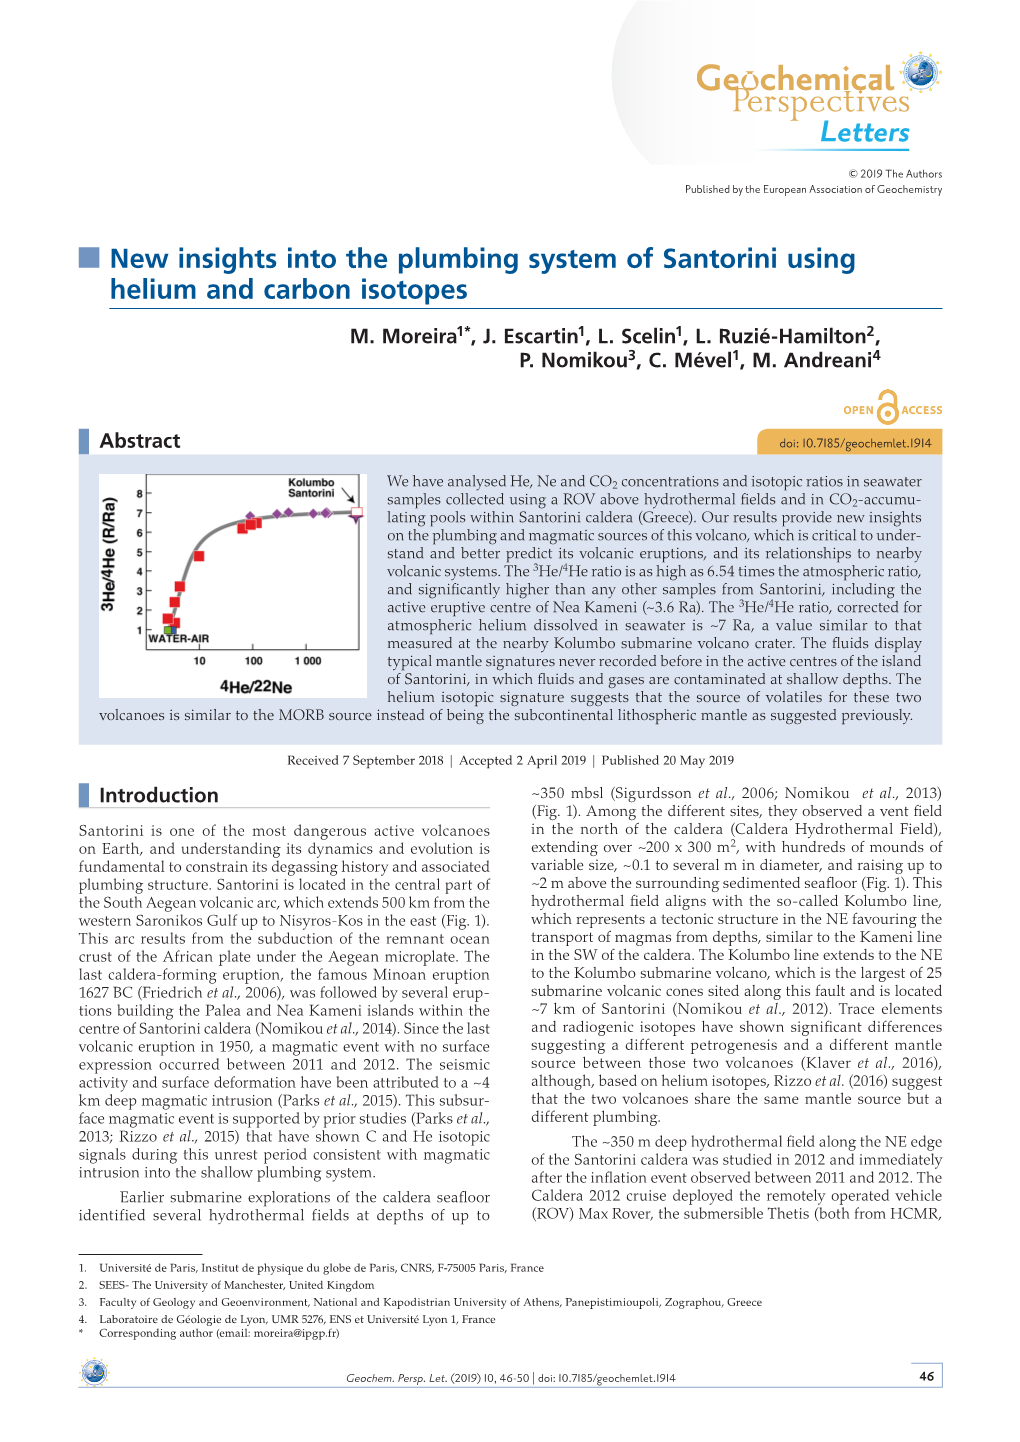 New Insights Into the Plumbing System of Santorini Using Helium and Carbon Isotopes